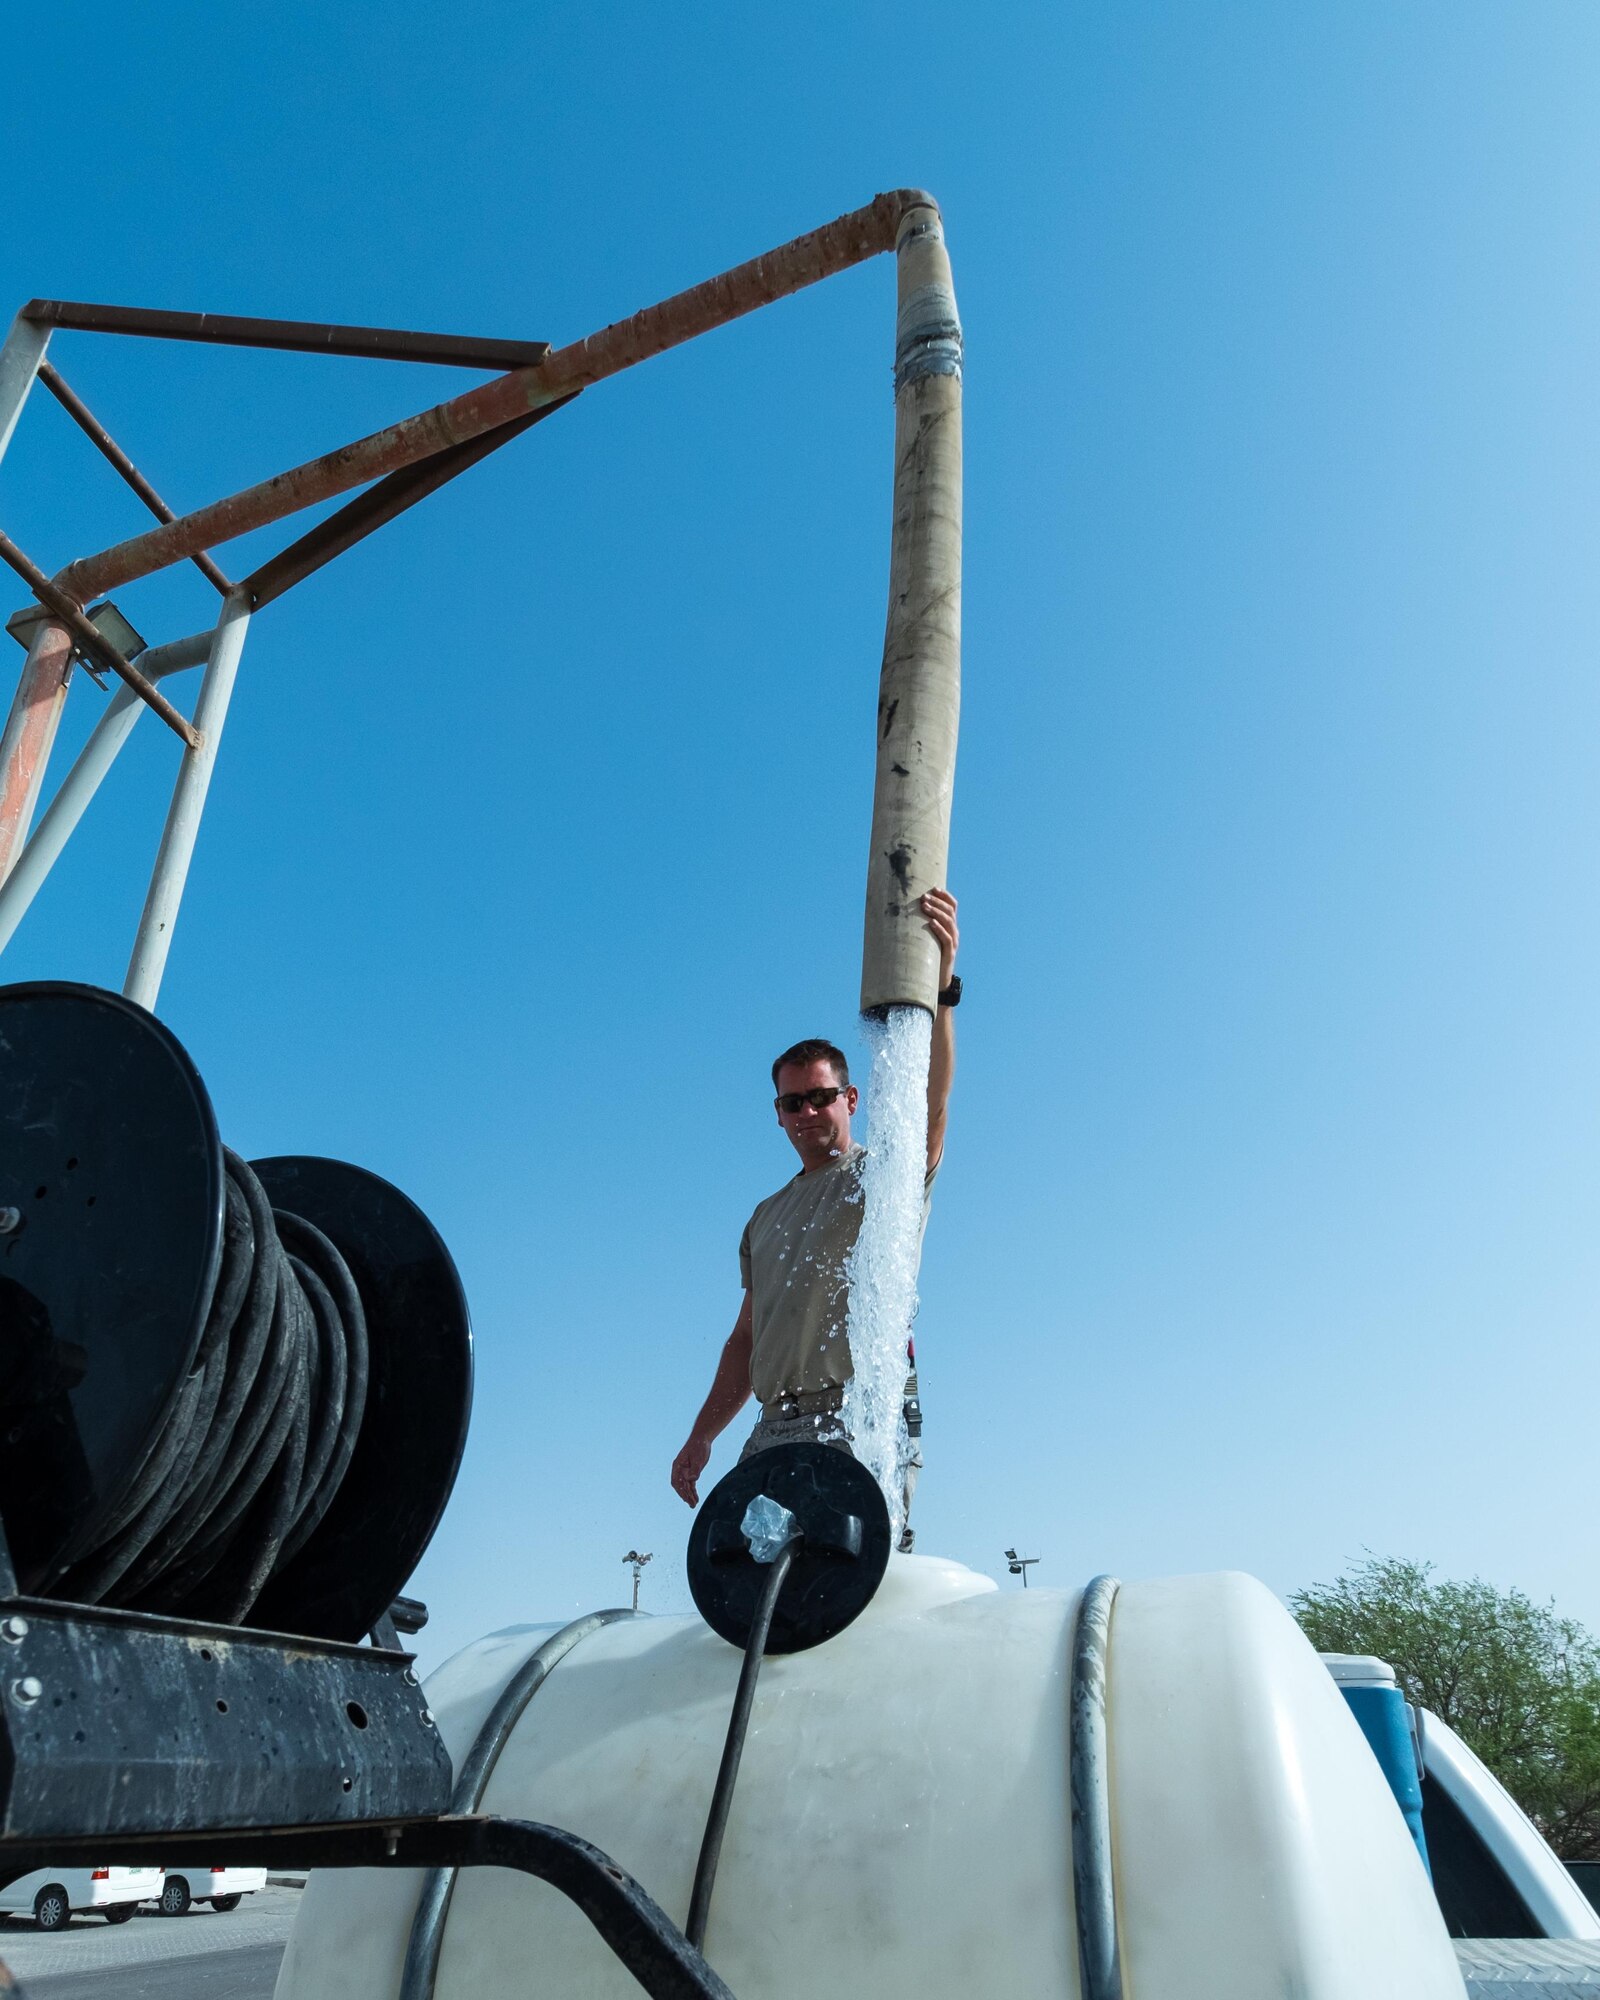 Tech. Sgt. James, 380th Expeditionary Civil Engineer Squadron heating, ventilation, and air conditioning technician, fills a tank with water August 8, 2017, at Al Dhafra Air Base, United Arab Emirates.